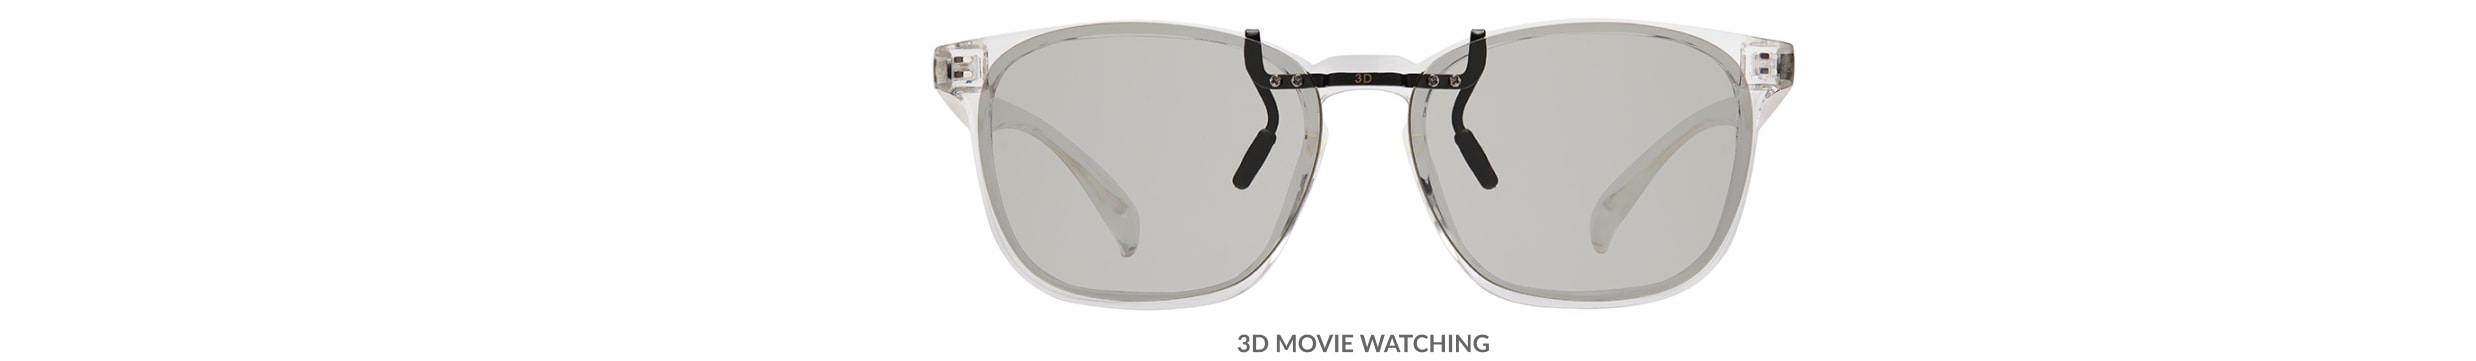 Custom clip-ons. Our polarized custom clip-ons reduce glare and are available for almost any frame. Each clip-on is specially cut to fit the frame with prices starting at just $3.95  (Compare to $50). Zenni square glasses #2020123 in clear, shown with 3D movie watching custom clip-on.